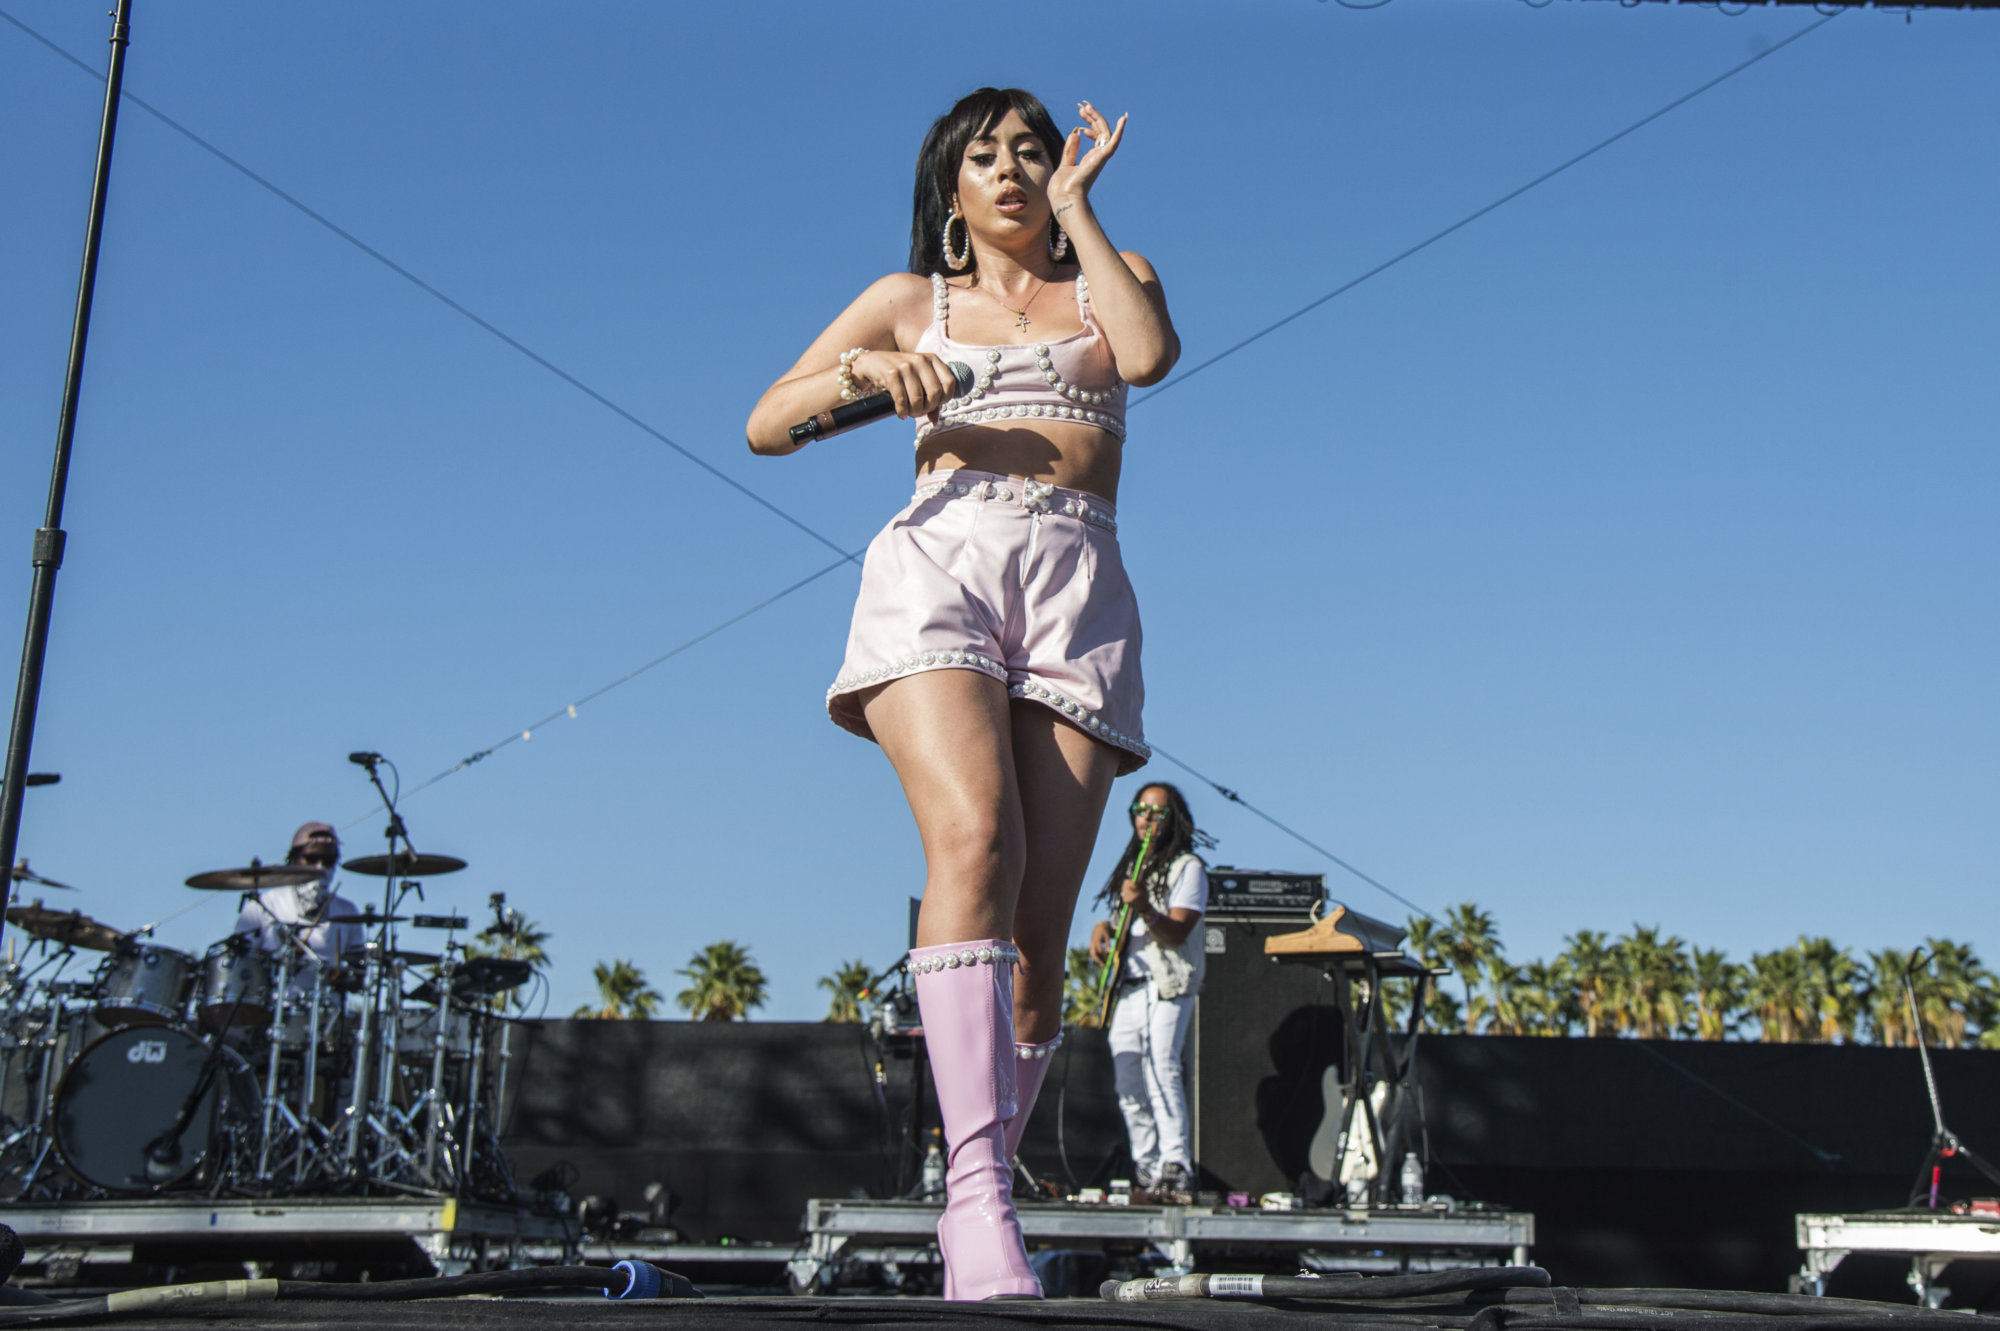 Kali Uchis performs at the Coachella Music &amp; Arts Festival at the Empire Polo Club on Friday, April 20, 2018, in Indio, Calif. (Photo by Amy Harris/Invision/AP)